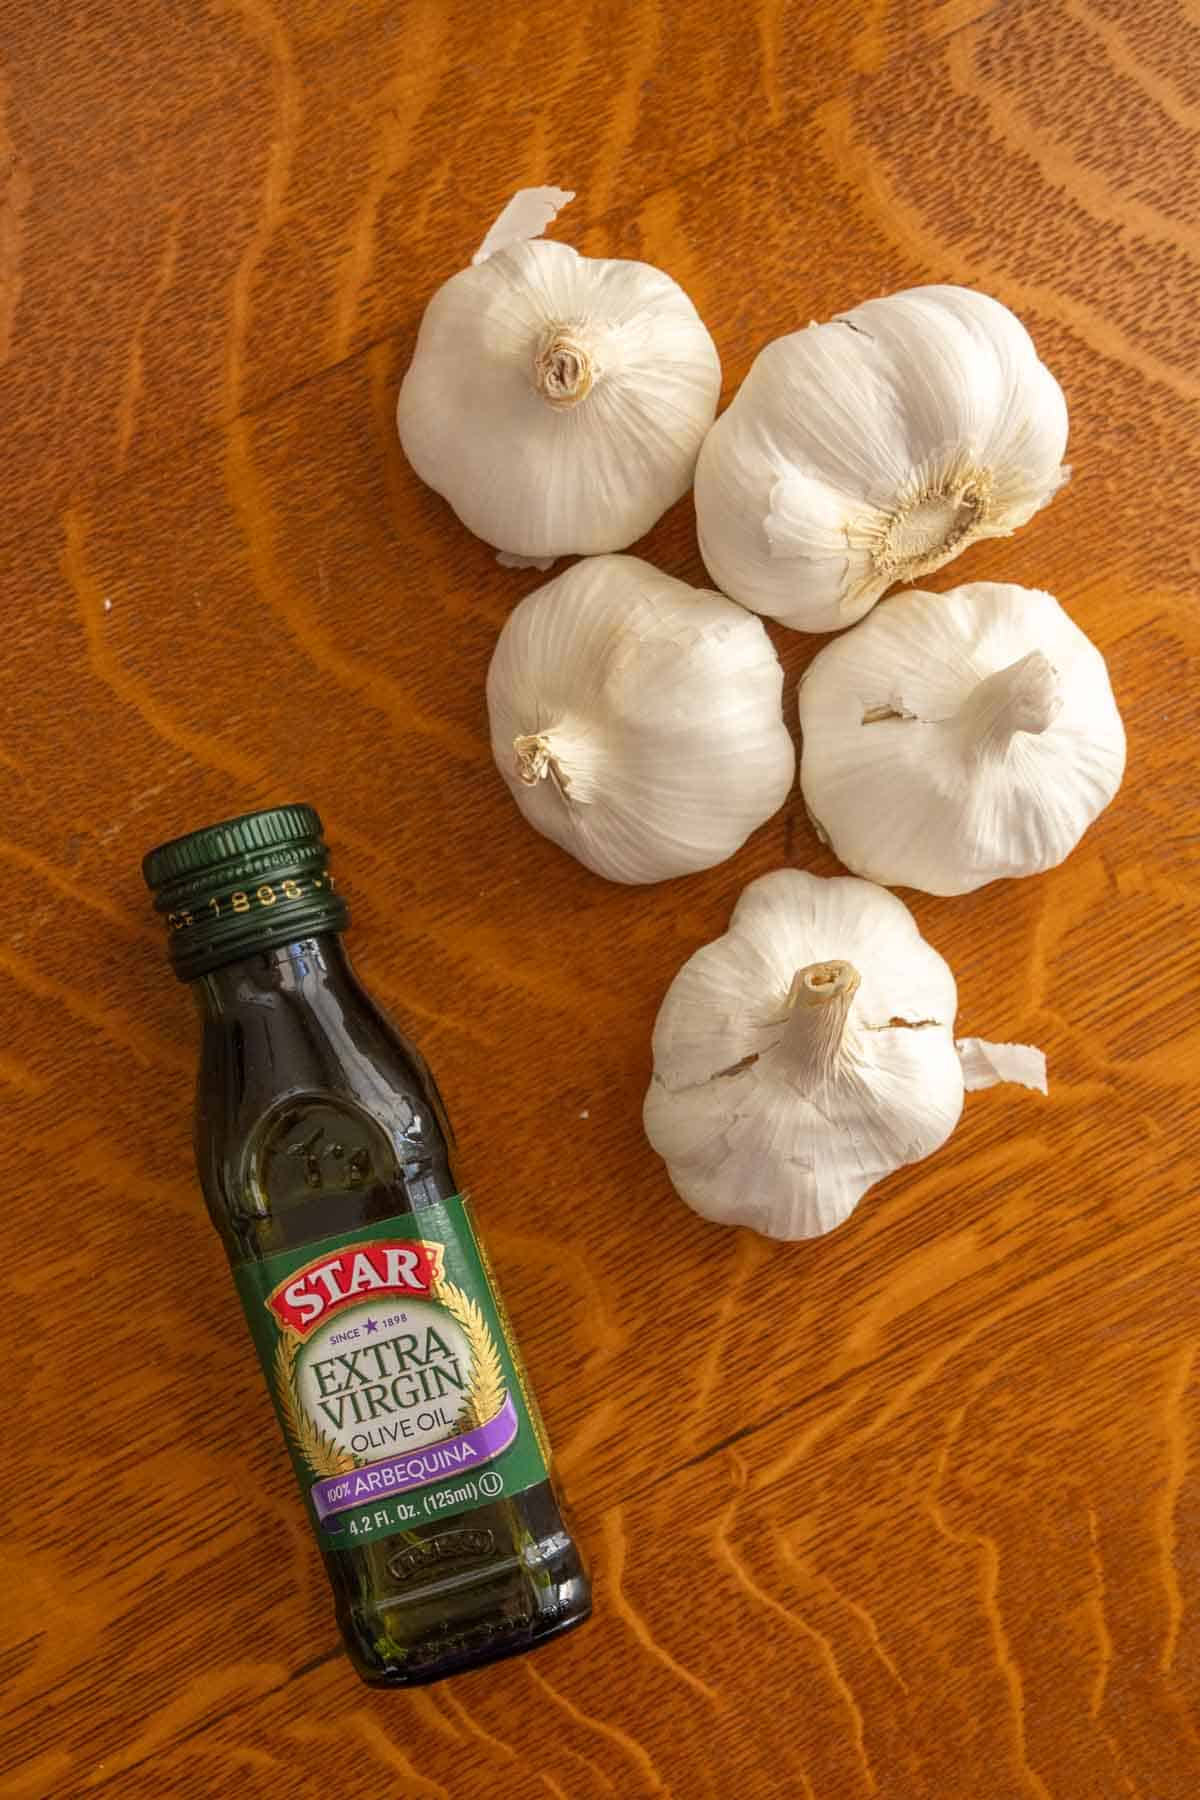 Garlic and olive oil on a wooden table.